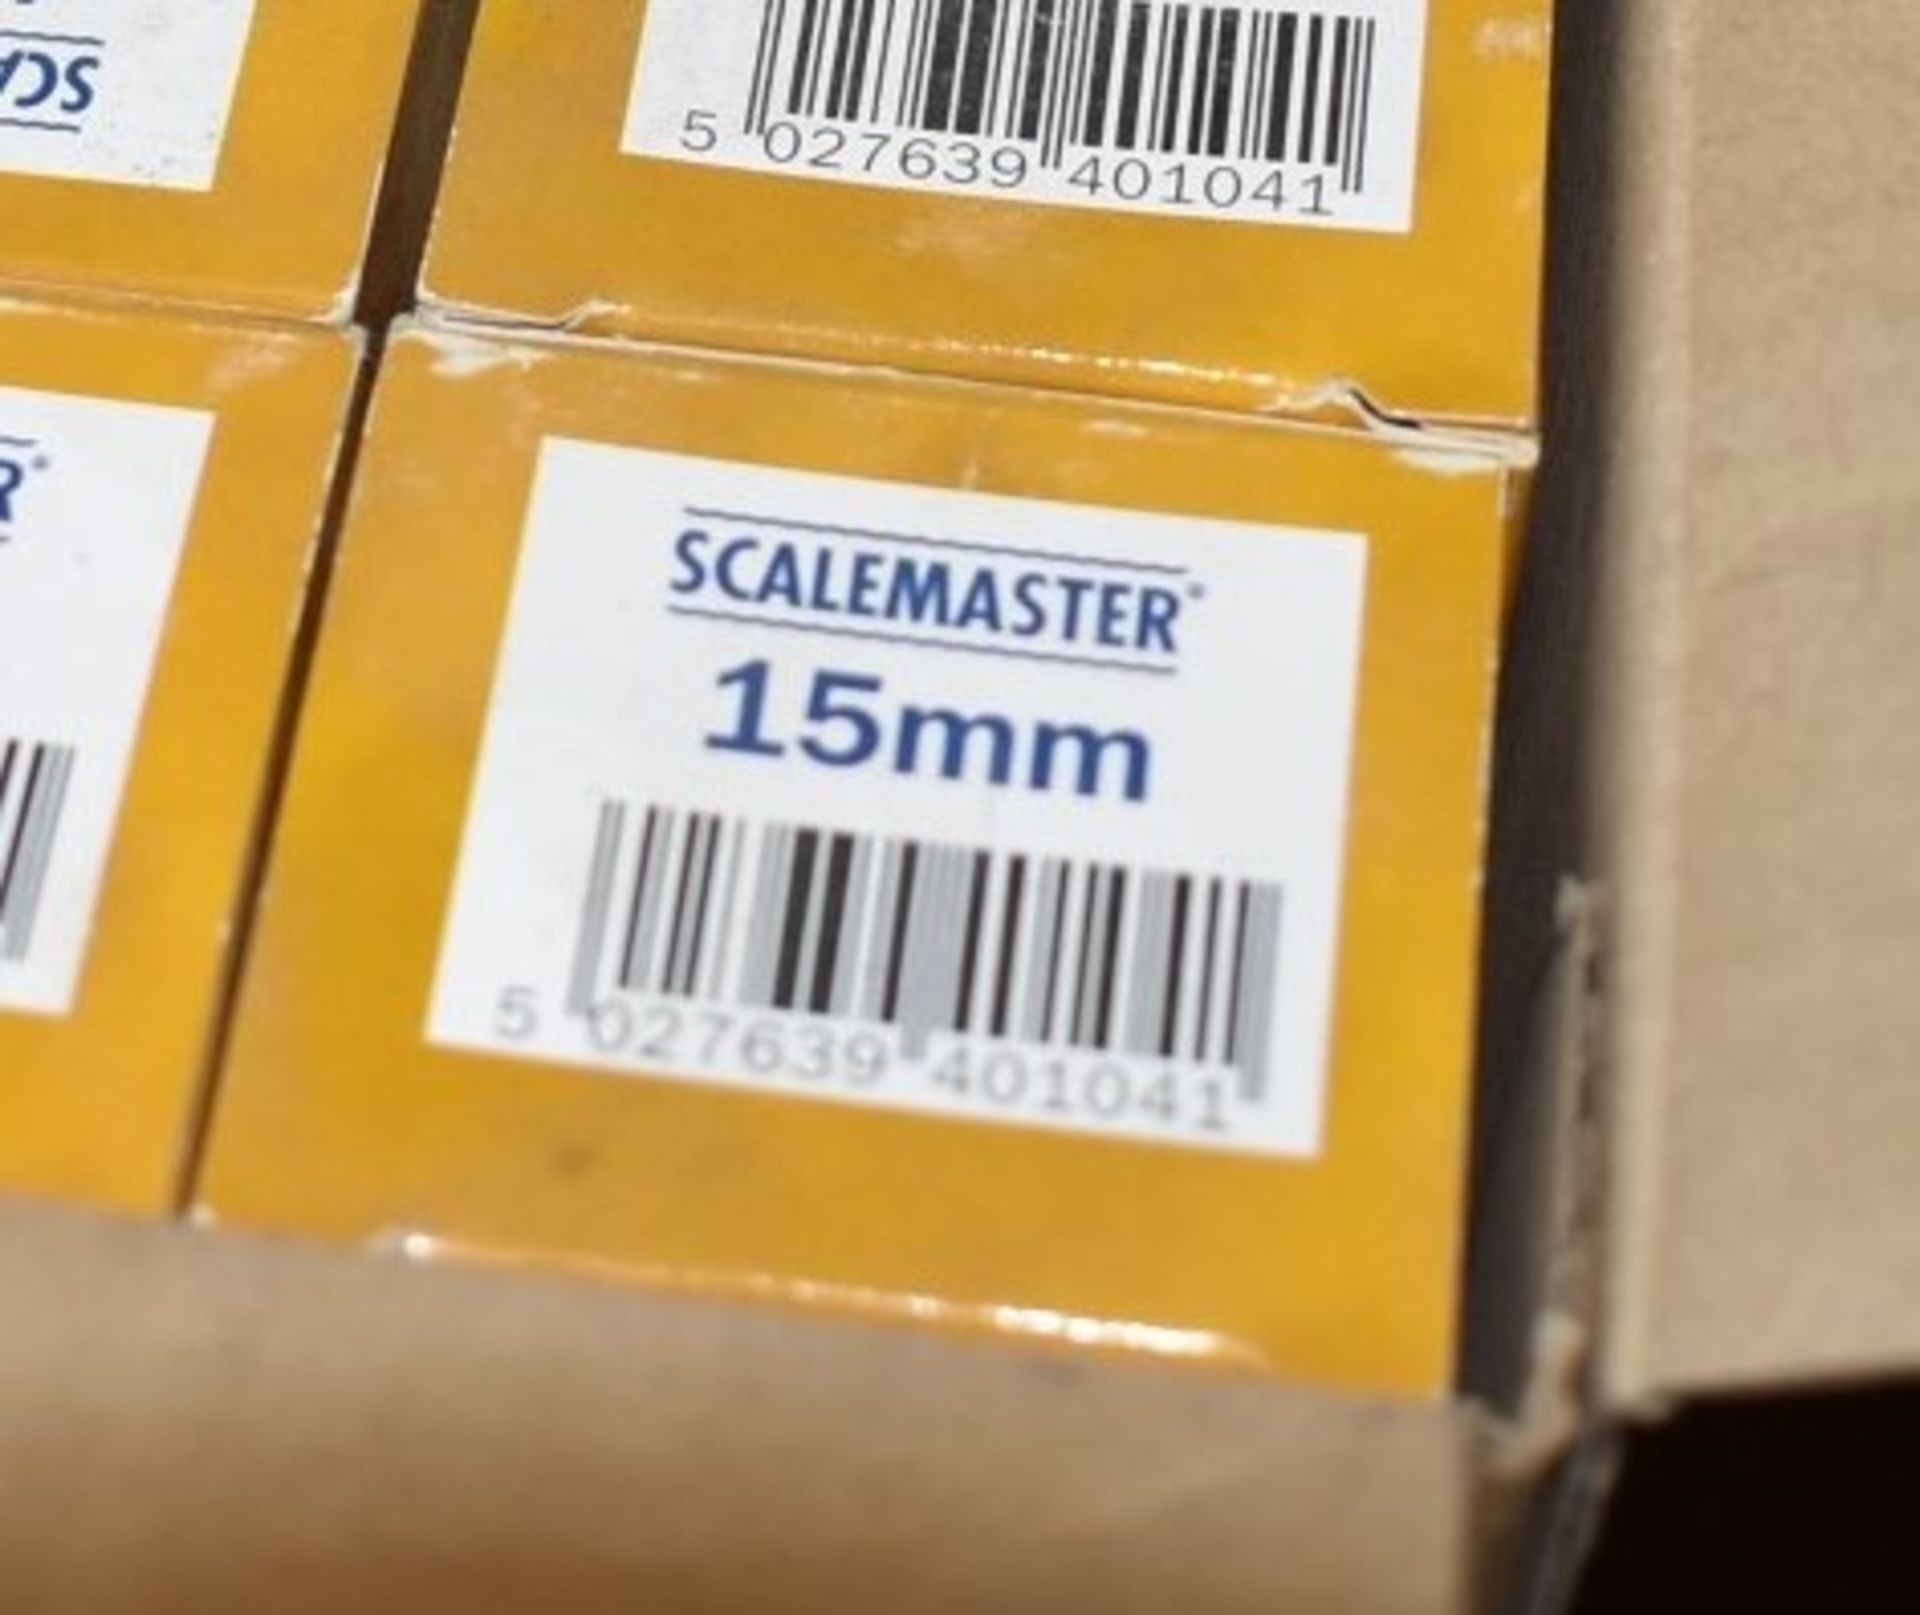 7 x Scalemaster Electrolytic Gold Electrolytic 15mm Limescale Remover - New Boxed Stock - RRP £330 - Image 5 of 5